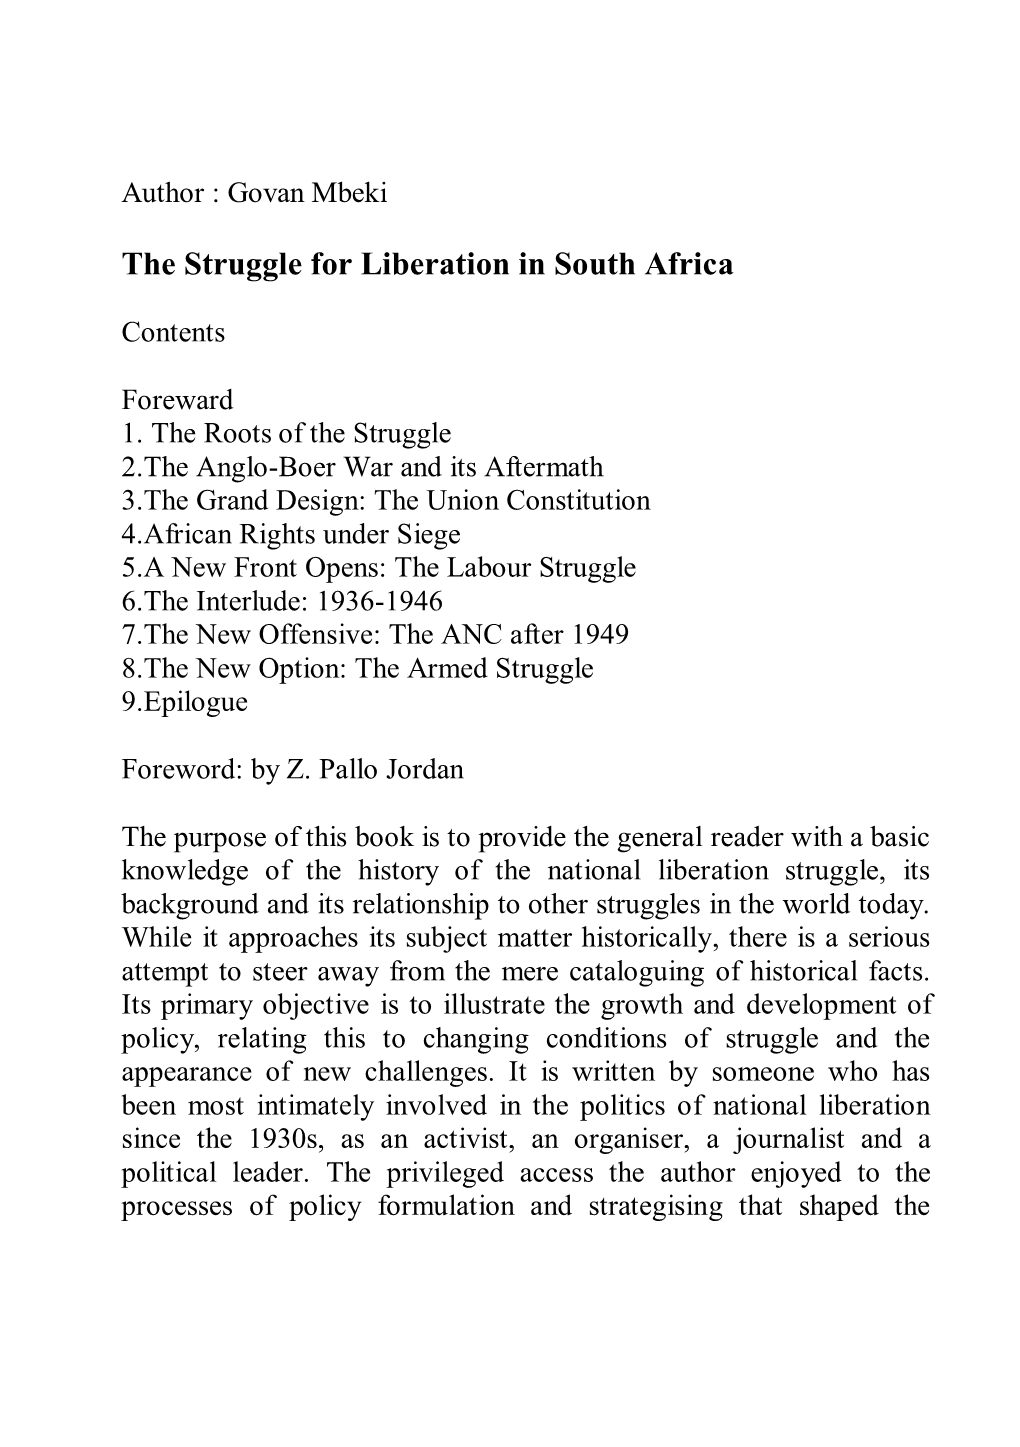 The Struggle for Liberation in South Africa